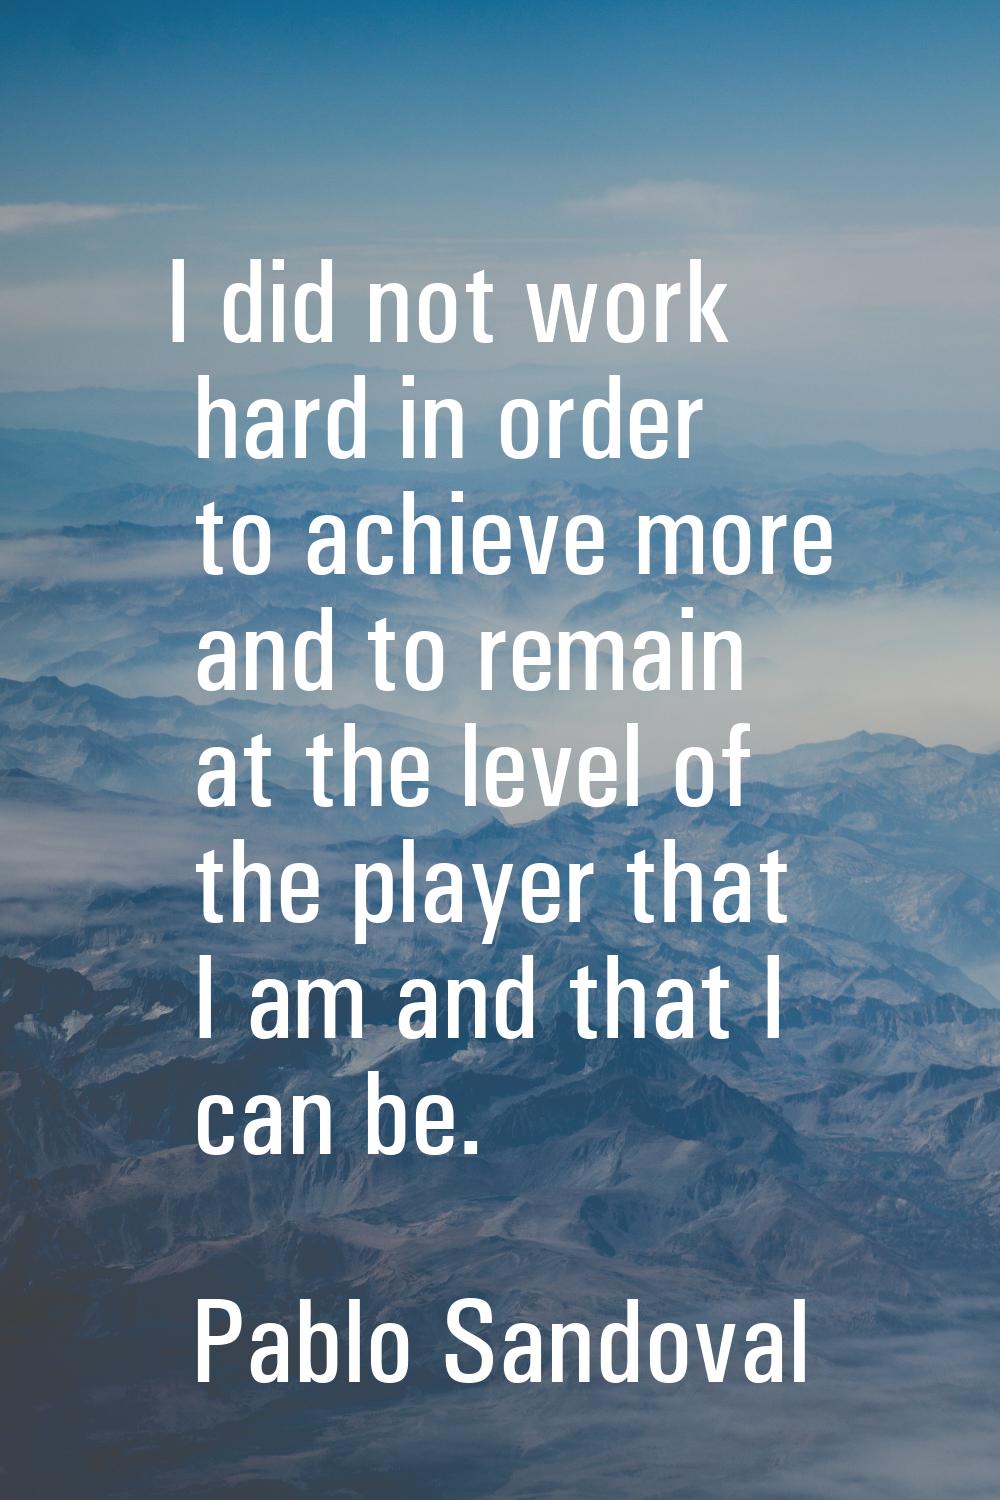 I did not work hard in order to achieve more and to remain at the level of the player that I am and